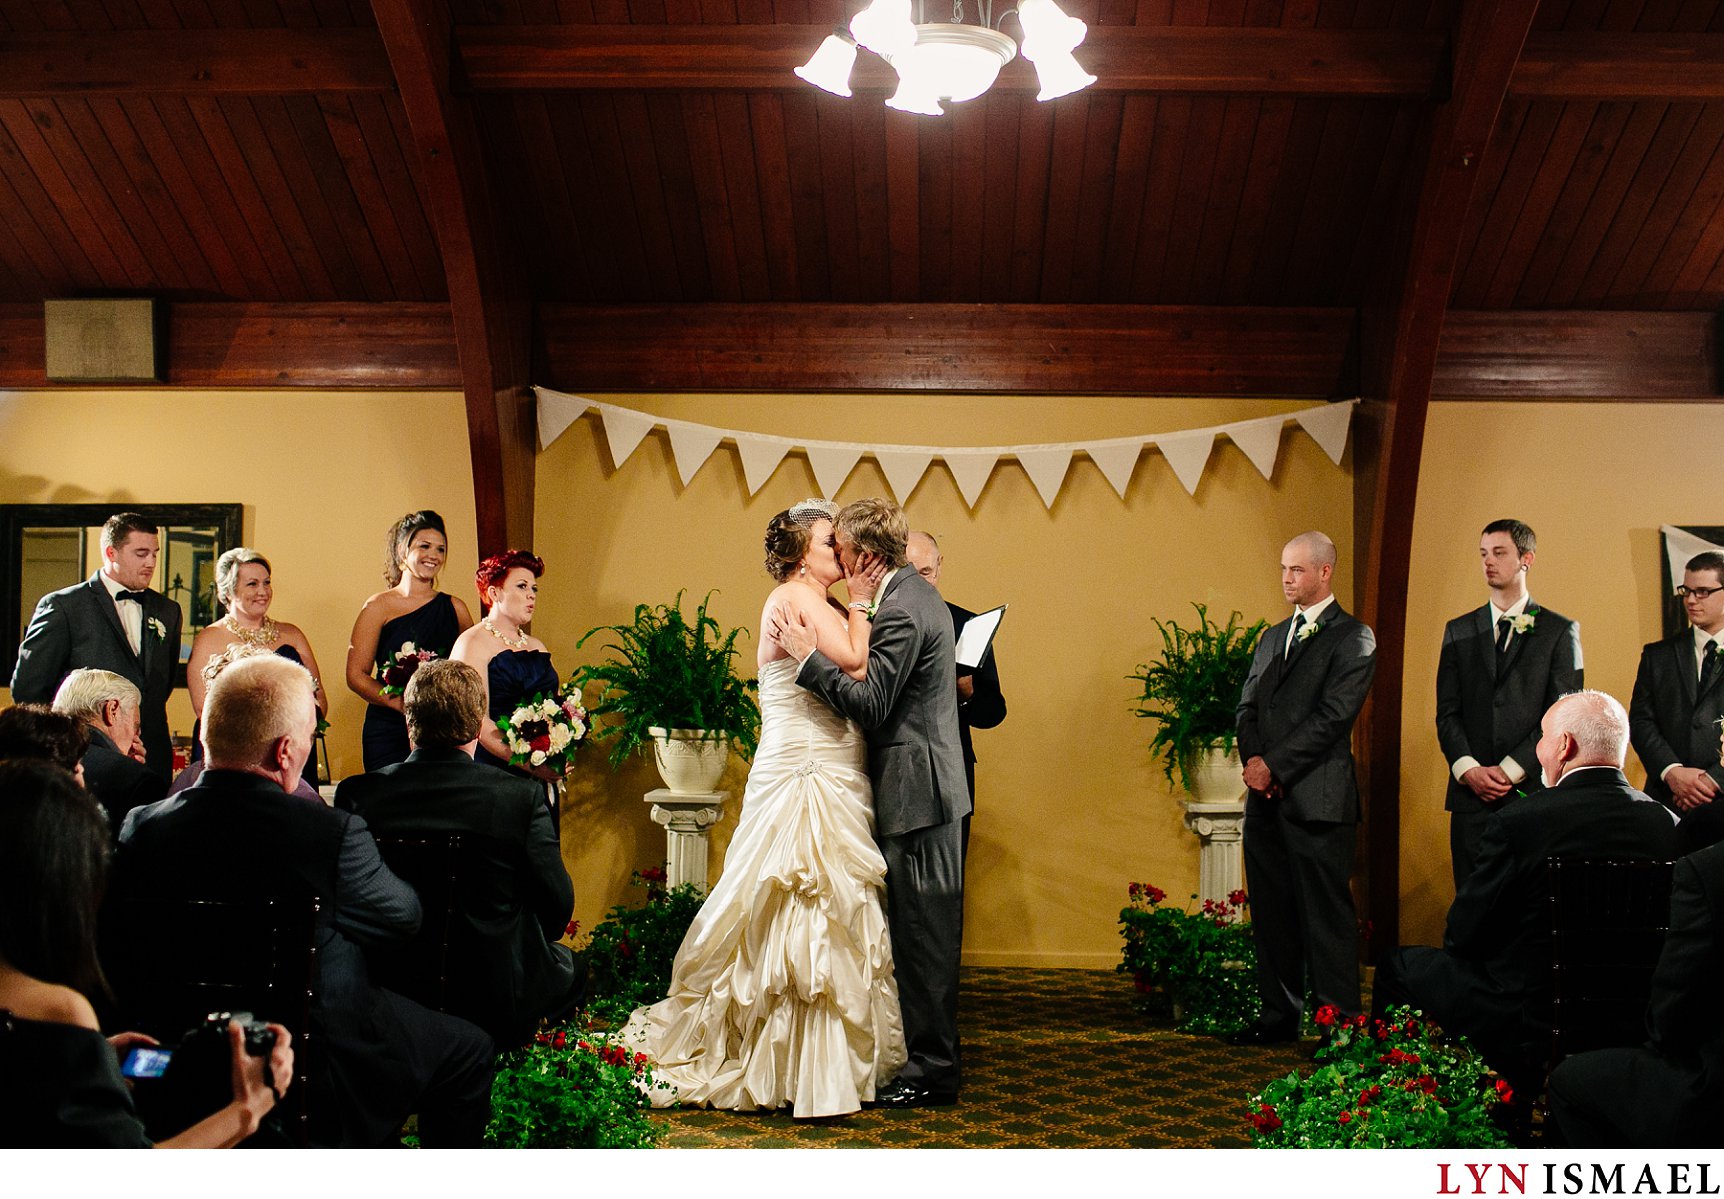 The first kiss at an indoor wedding ceremony at the Cutten Fields in Guelph.